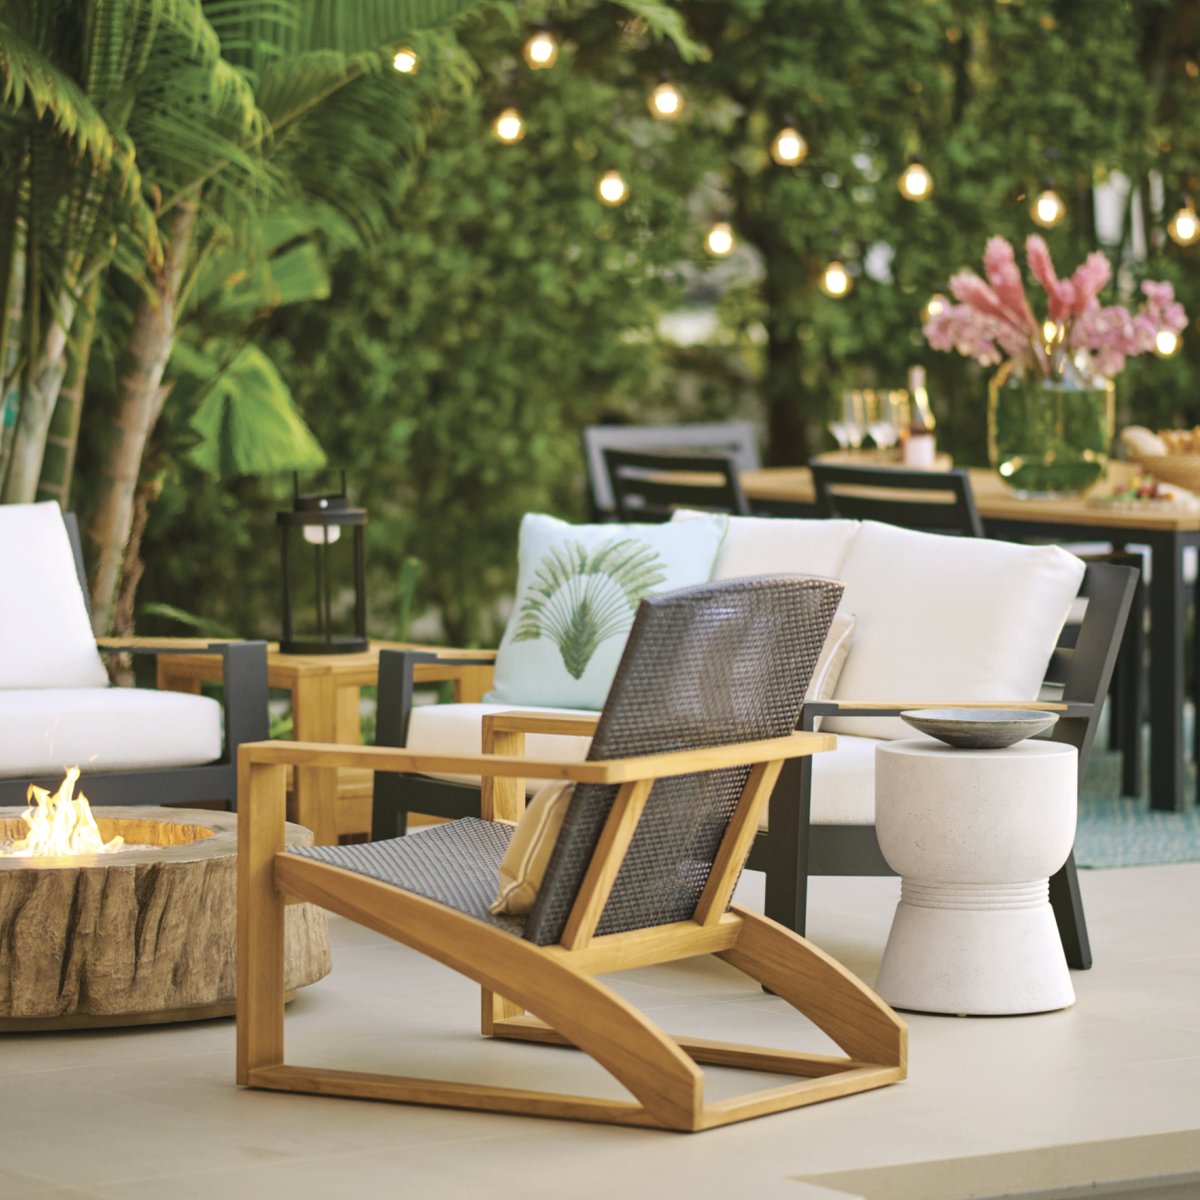 Adding striking silhouettes to any outdoor living space quickly takes it from ordinary to extraordinary. 
.
.
.
#outdoorfurniture #outdoordesign #outdoorliving #patiodesign #patiofurniture #backyardinspo